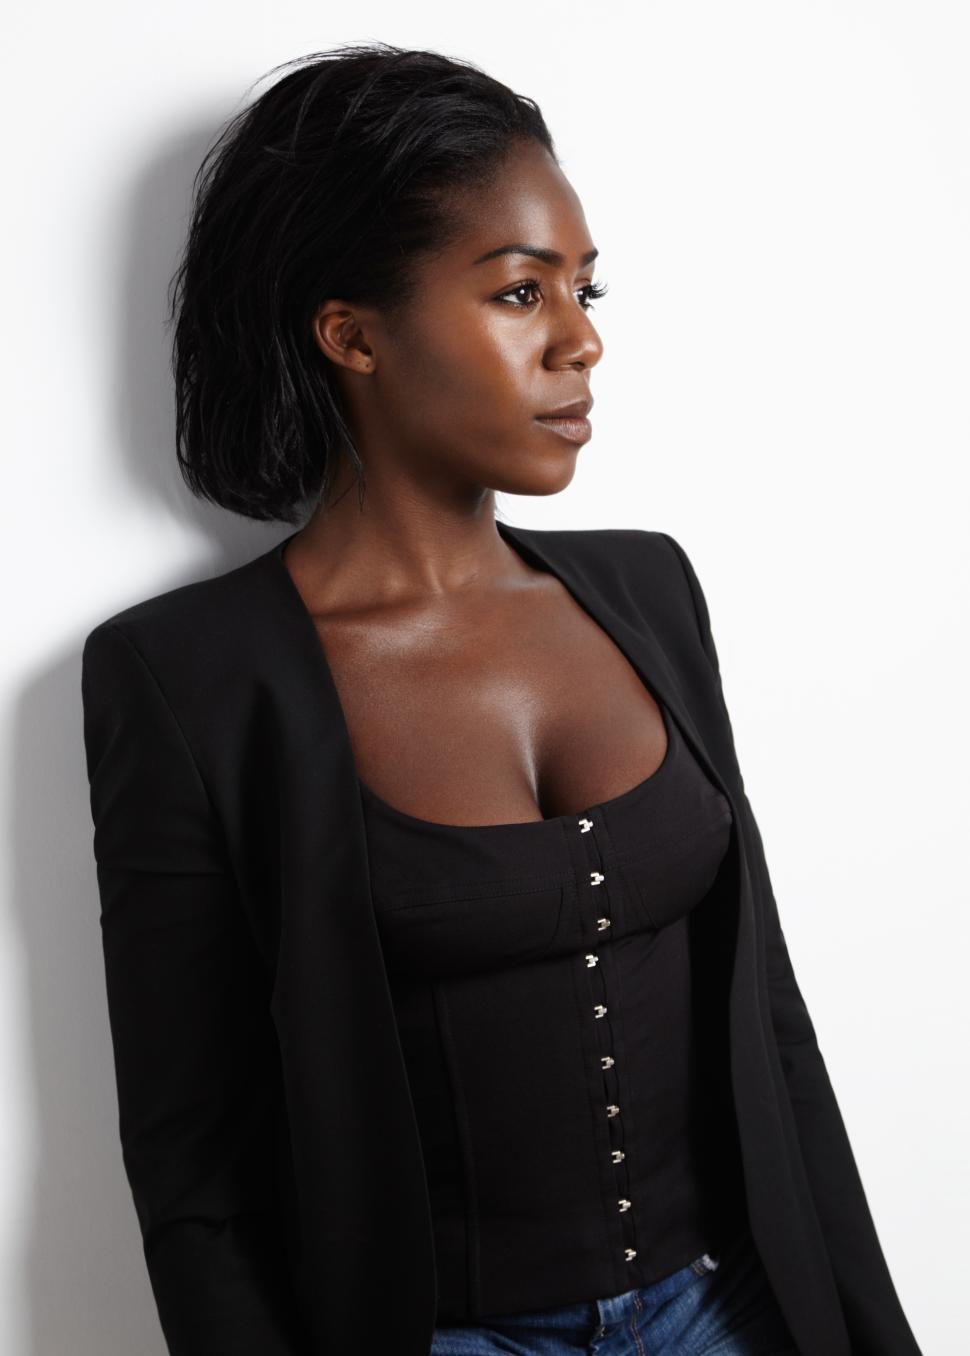 Free Image of beauty black woman in a jacket, shown in profile view 